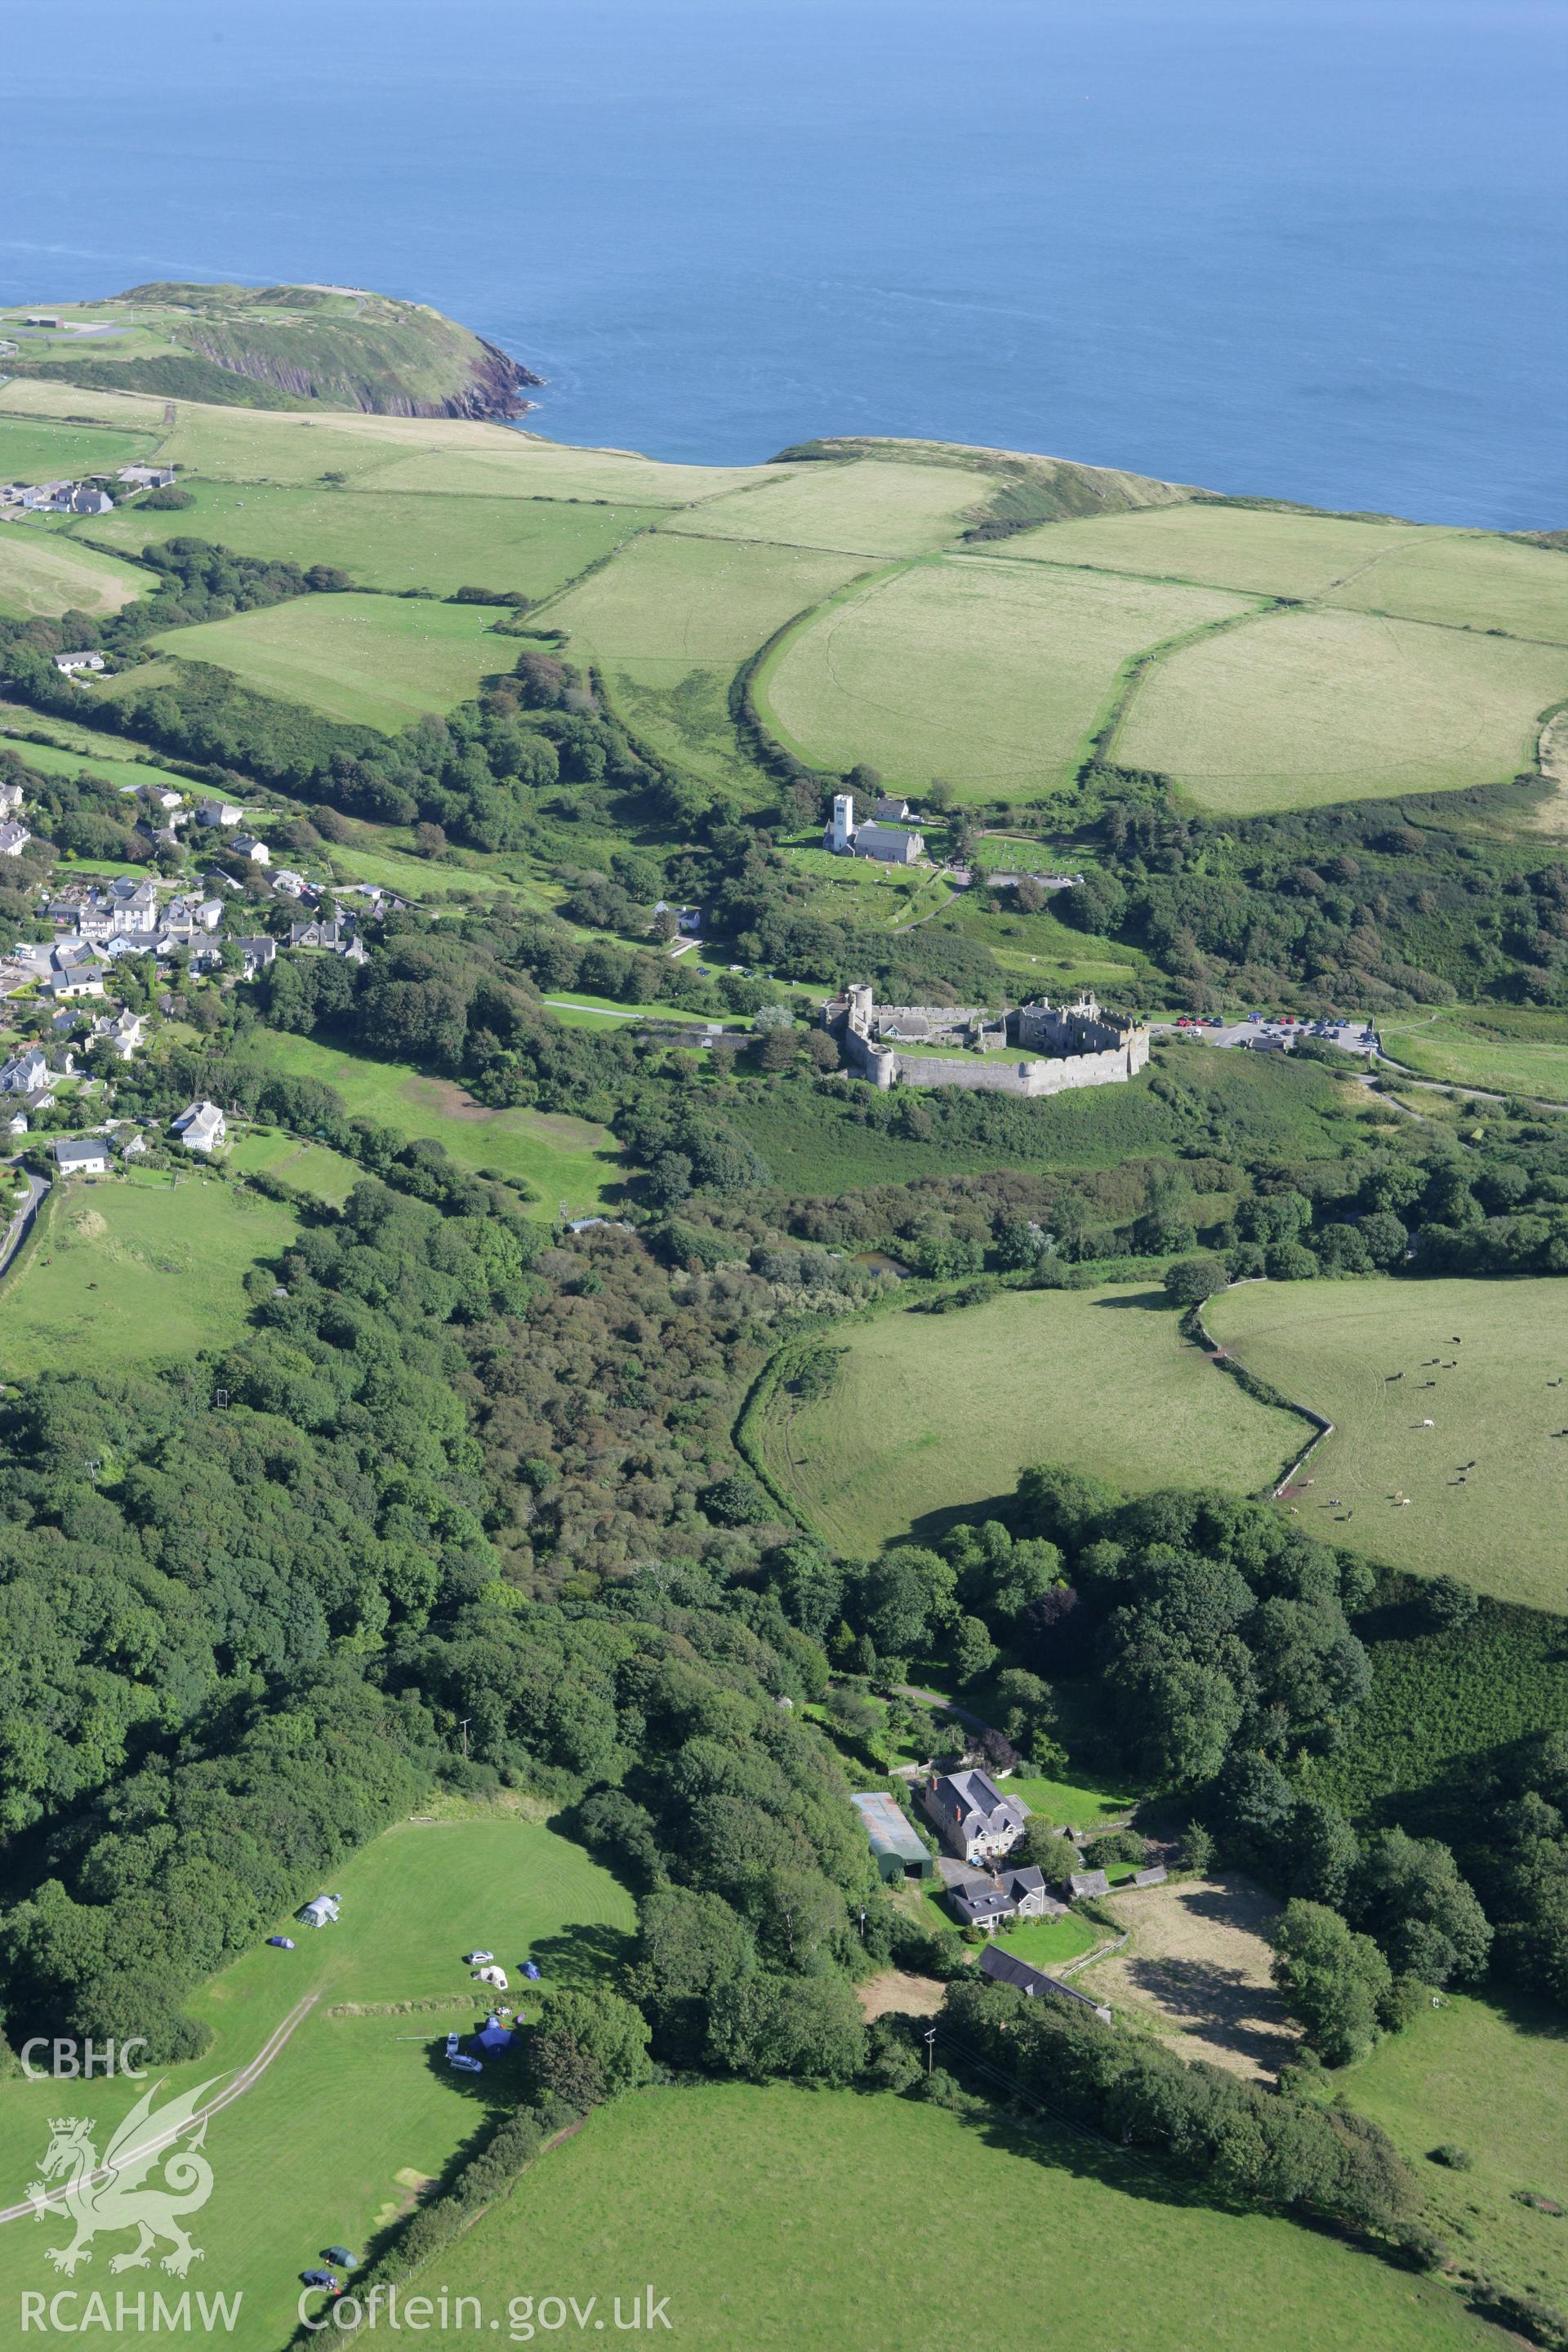 RCAHMW colour oblique aerial photograph of Manorbier Castle, viewed from the north-west. Taken on 30 July 2007 by Toby Driver